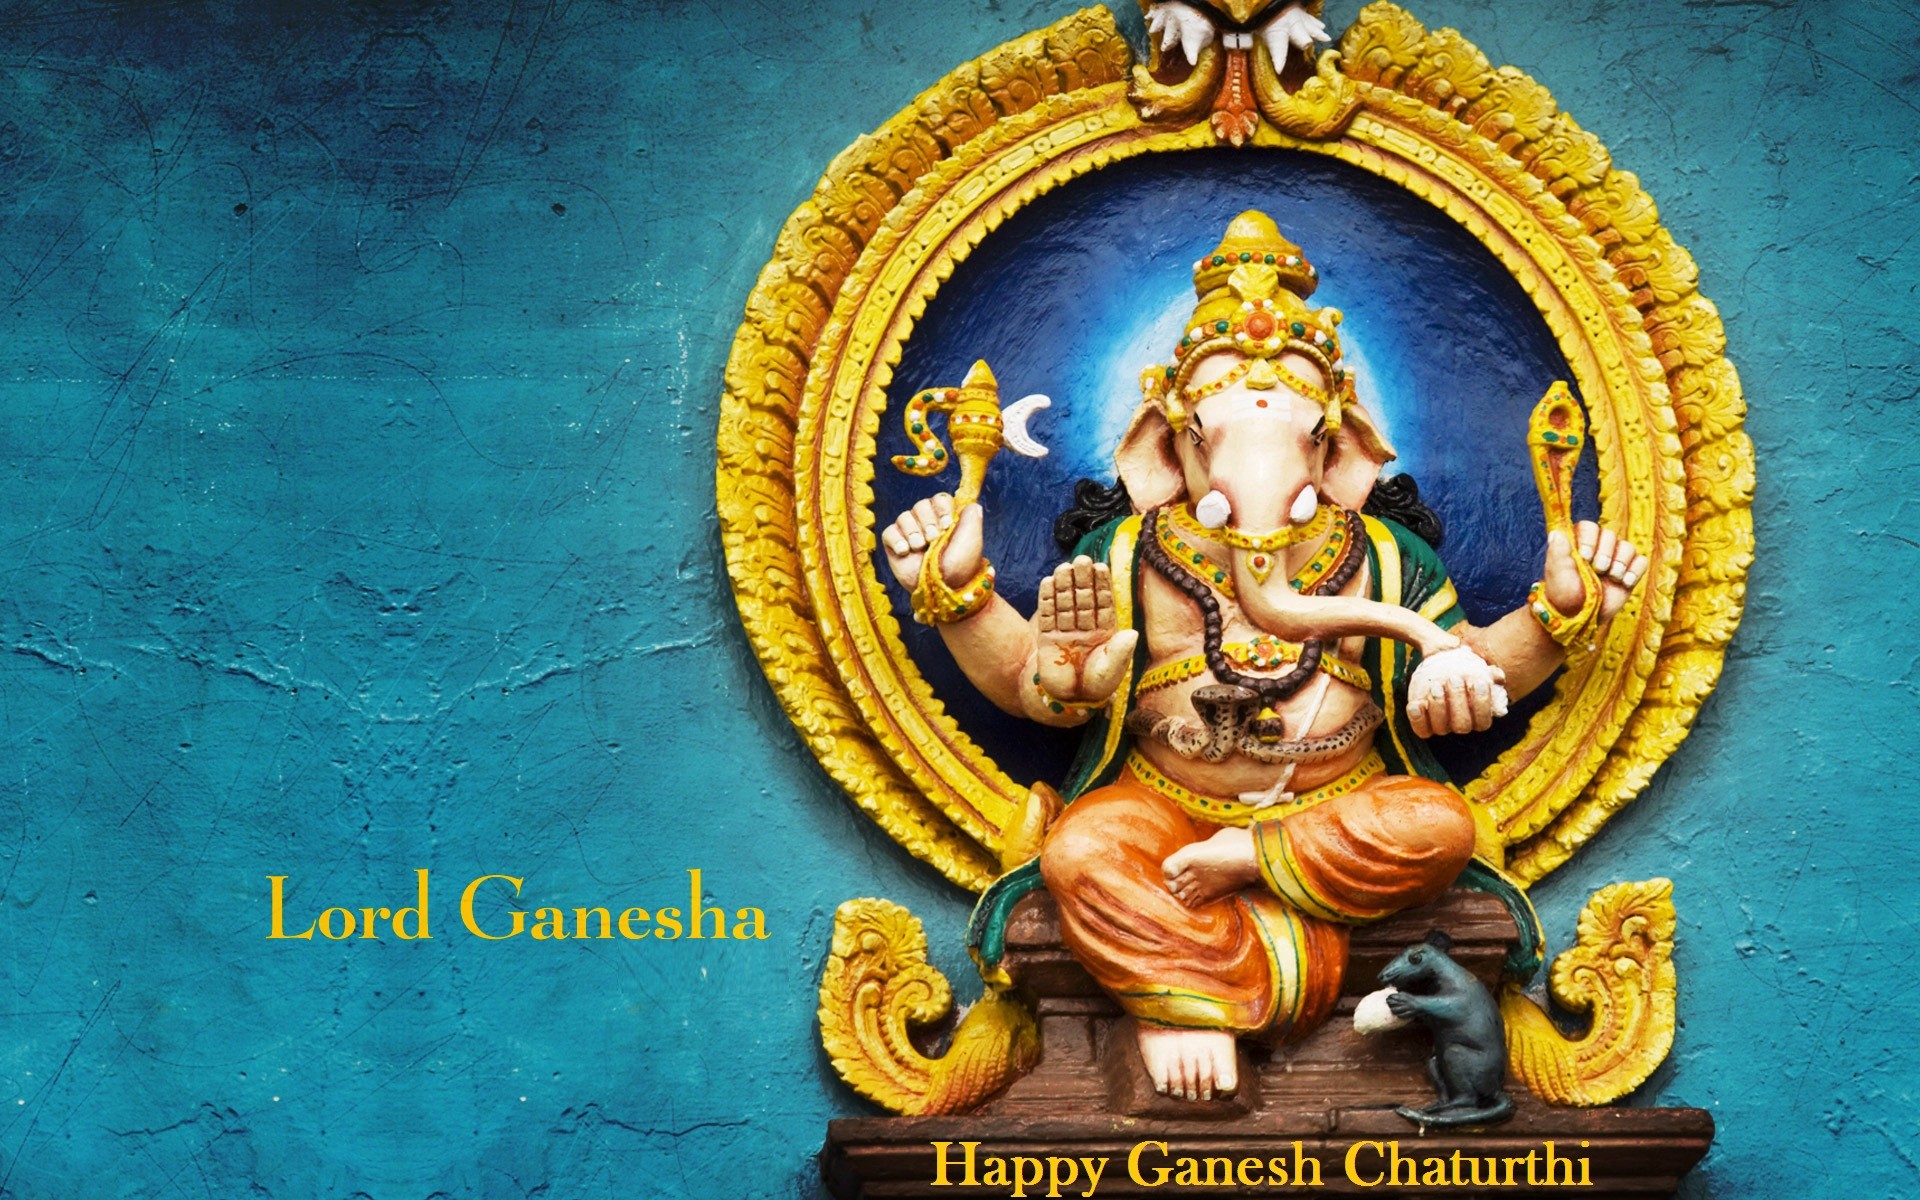 1920x1200 Lord Ganesh Chaturthi 2014 HD Wallpapers | Happy Ganesh Chaturthi 2013 |  Pinterest | Ganesh, Ganesh wallpaper and Happy ganesh chaturthi